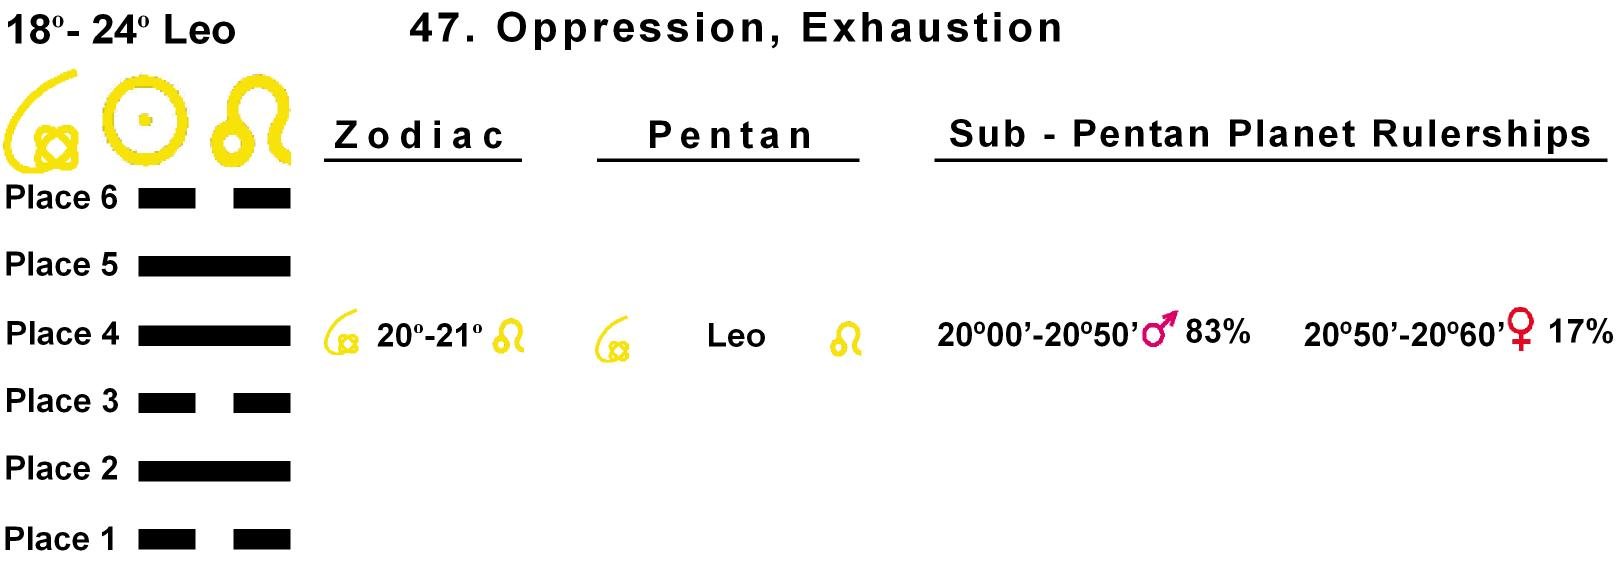 Pent-lines-05LE 20-21 Hx-47-Oppression Exhaustion